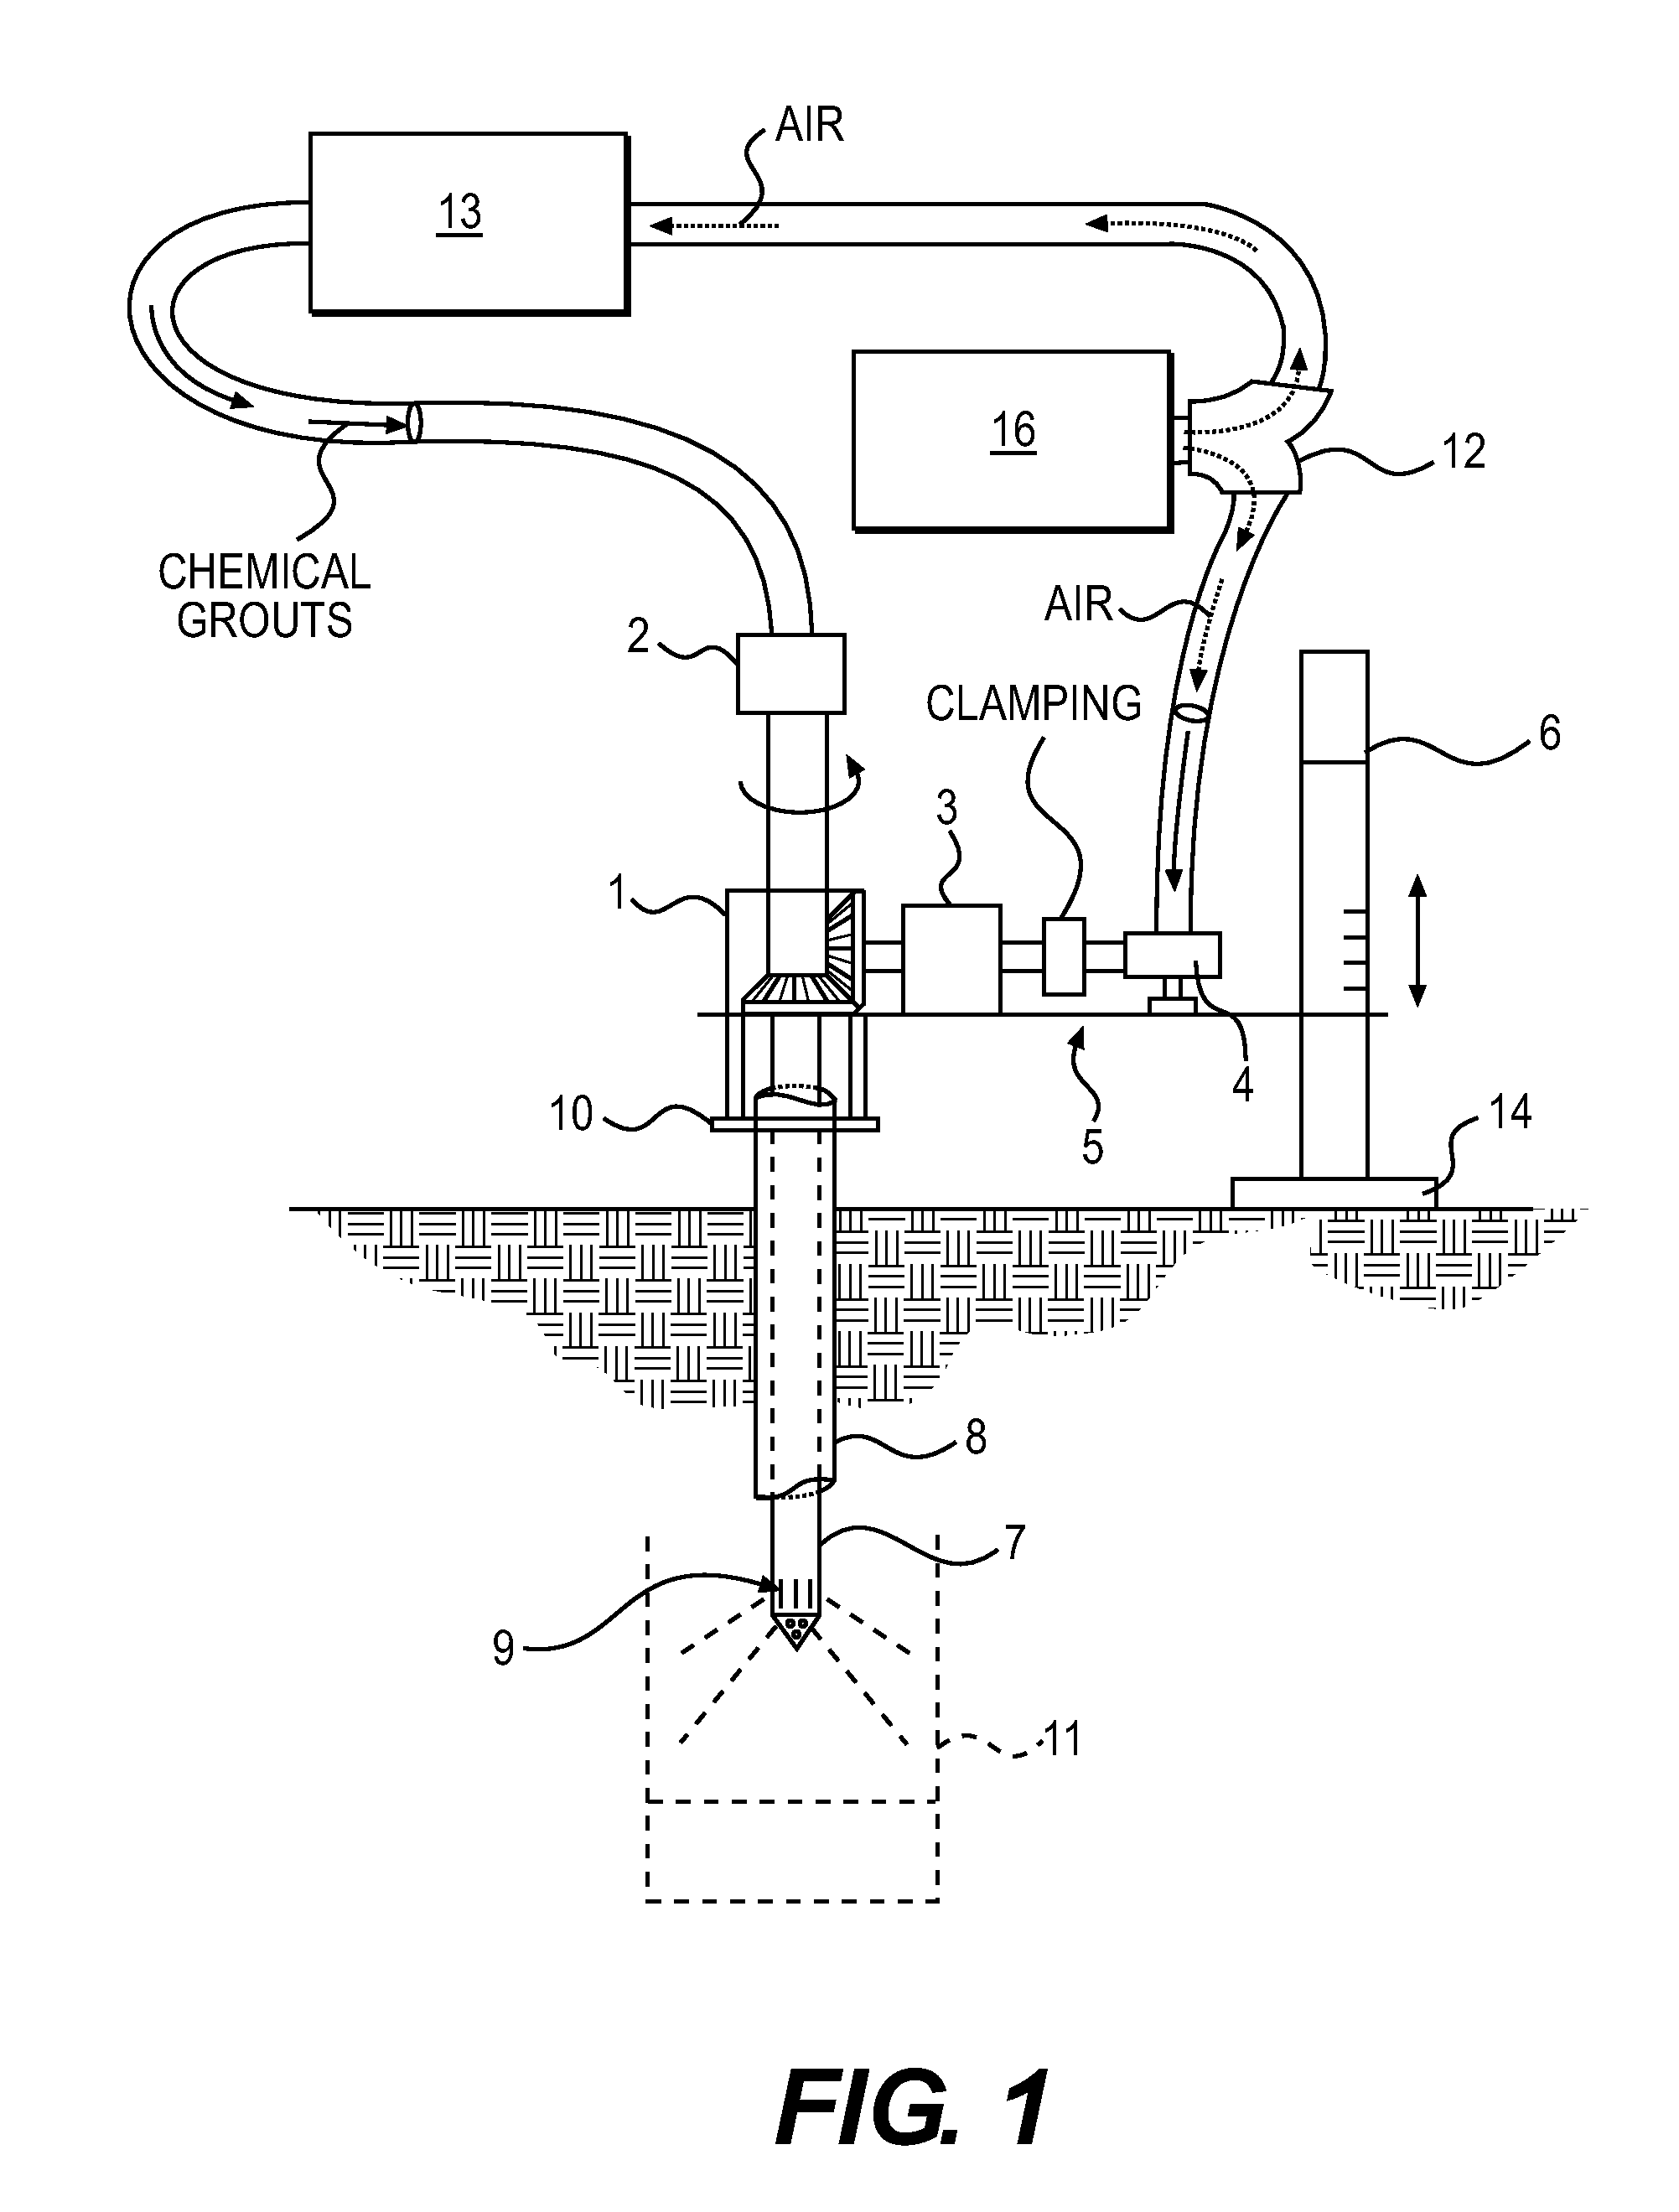 Jet grouting device with rotating roller bearing within casing pipe and rotating pipe